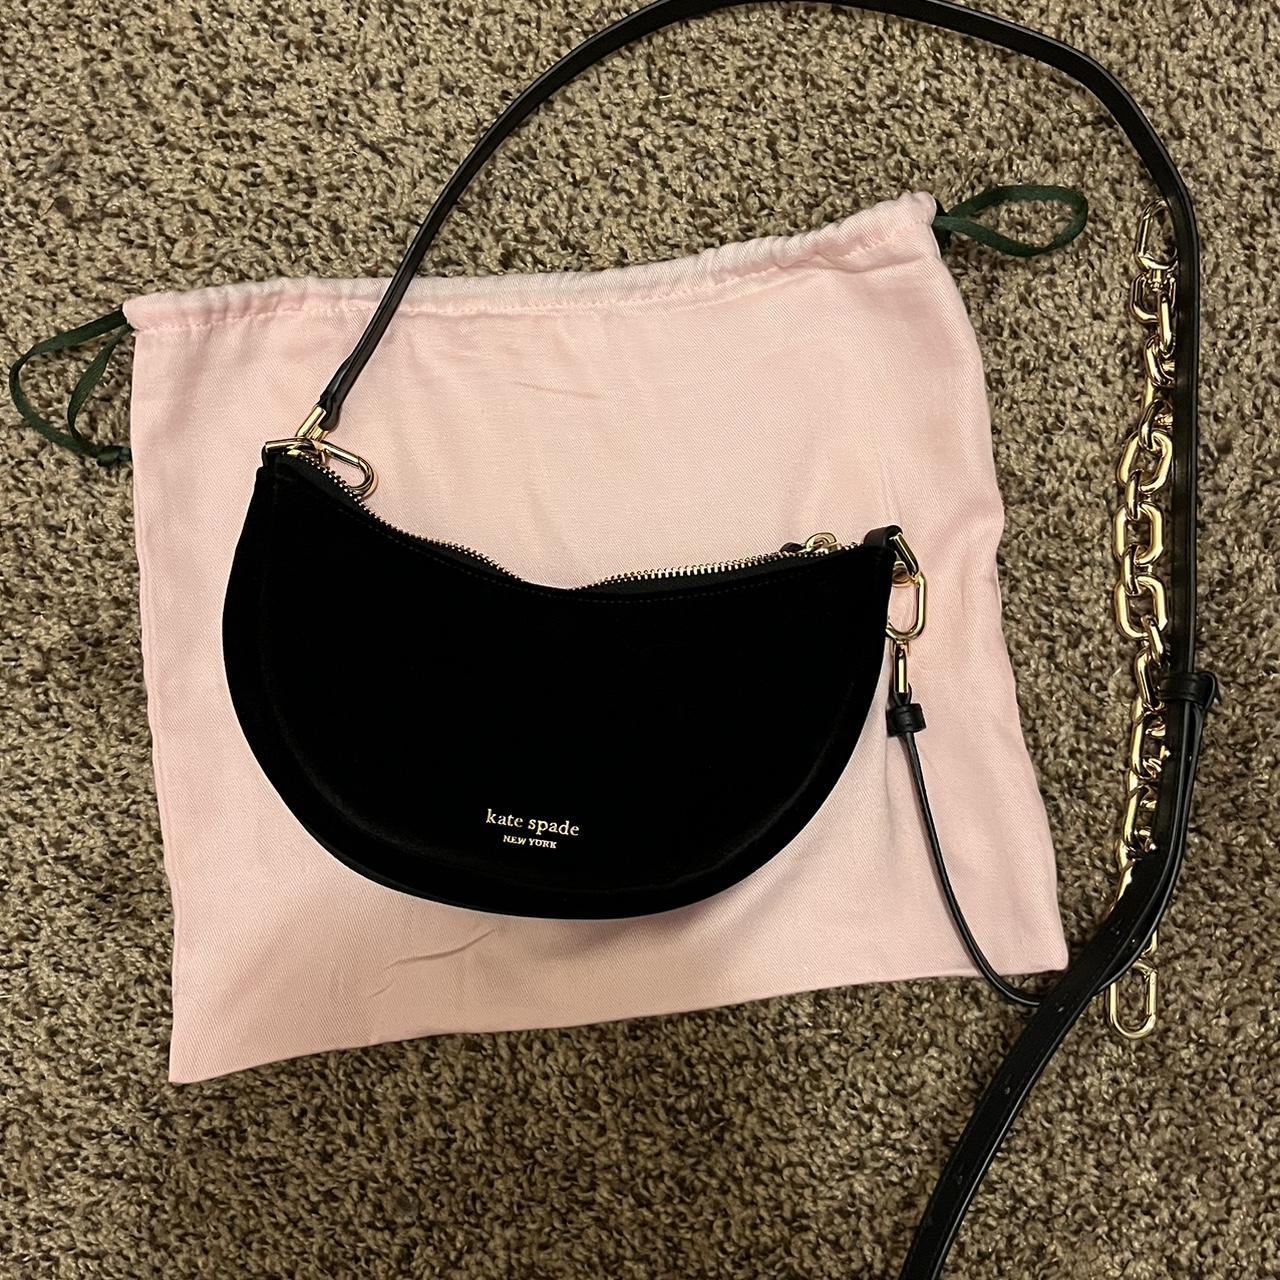 kate spade, Bags, Kate Spade Black Tote Purse With Gold Chain Strap